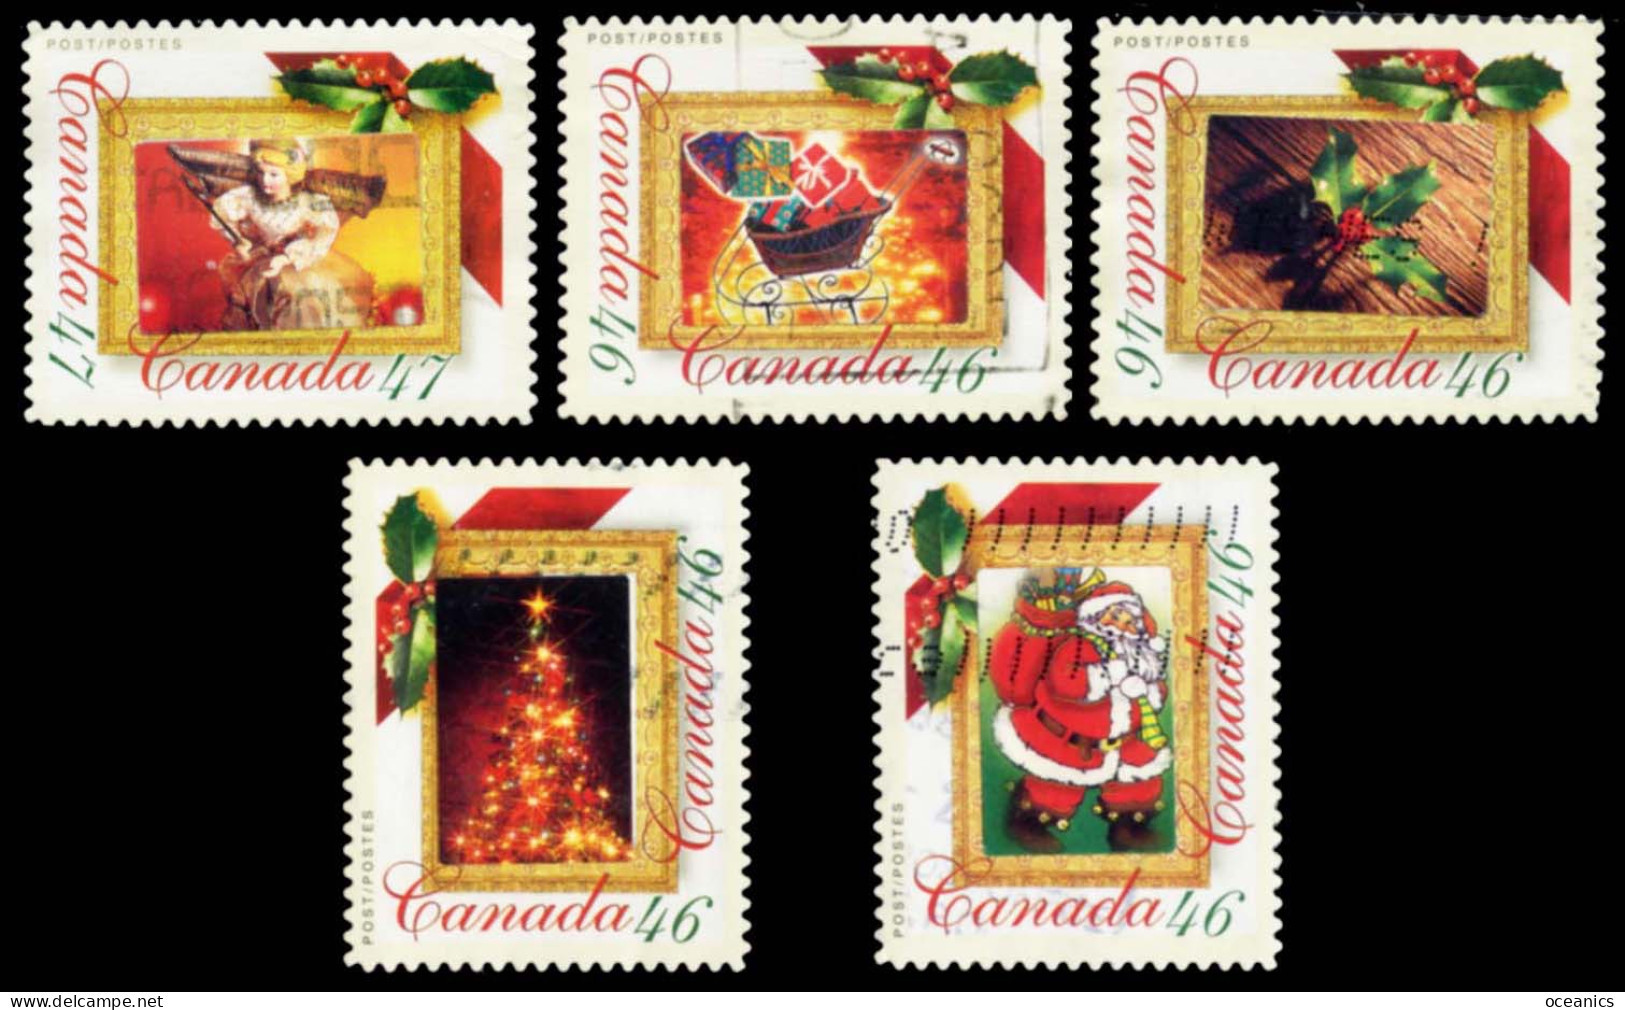 Canada (Scott No.1872 - Timbre Photo / Christmas / Picture Postage) (o) 5 DIFF. - Gebruikt